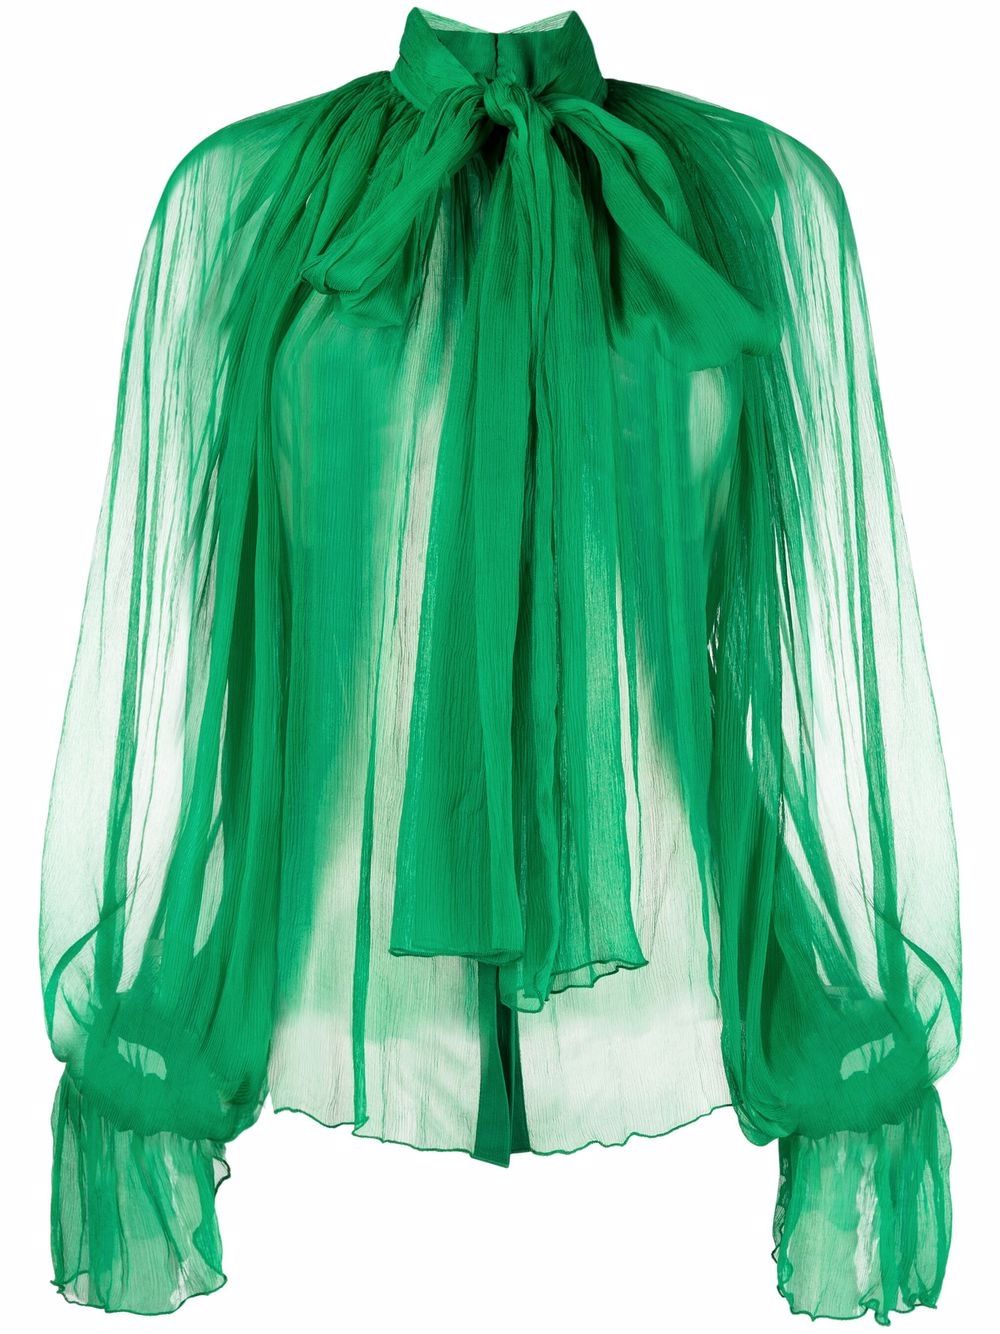 Atu Body Couture sheer pleated pussybow blouse - Green von Atu Body Couture